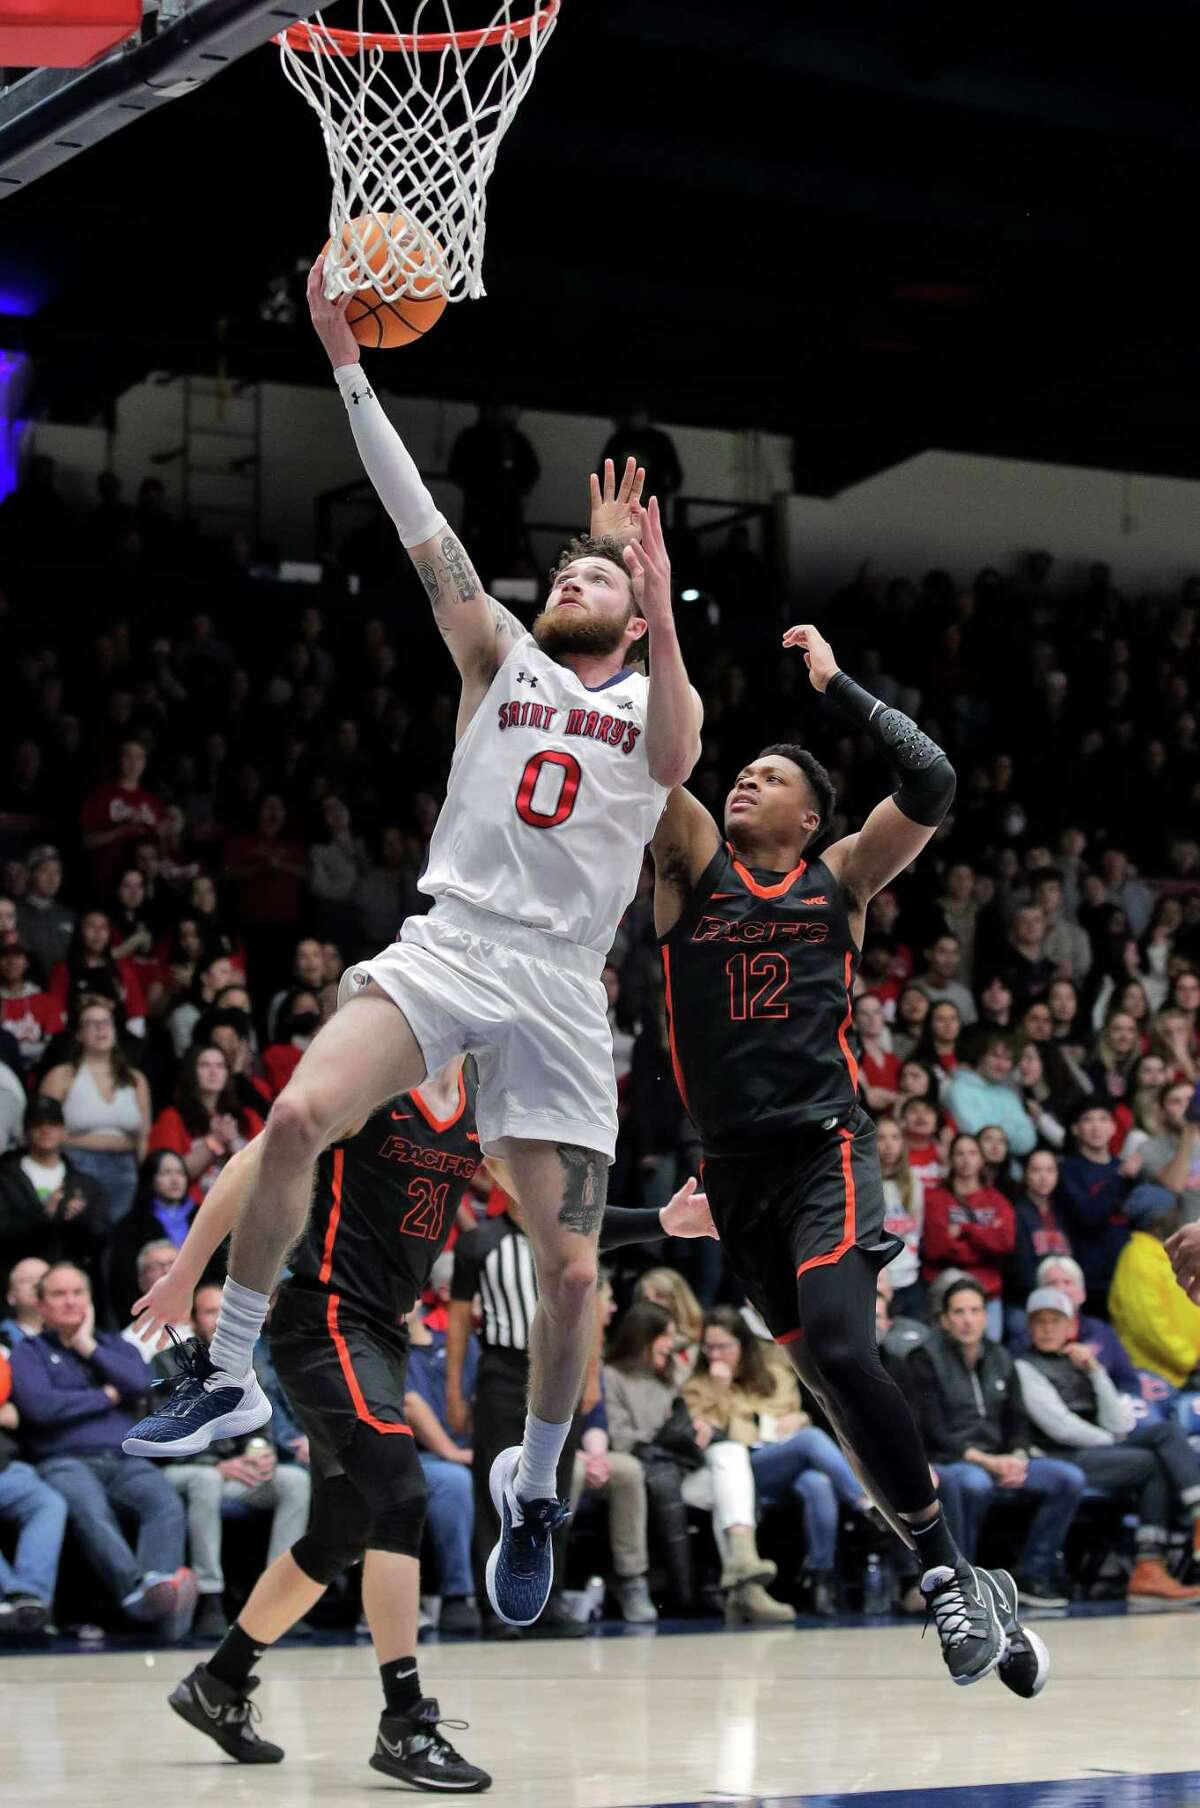 Logan Johnson (0) goes up for a shot in the first half as the St. Mary’s Gaels played the Pacific Tigers at University Credit Union Arena in Moraga, Calif., on Thursday, February 23, 2023.